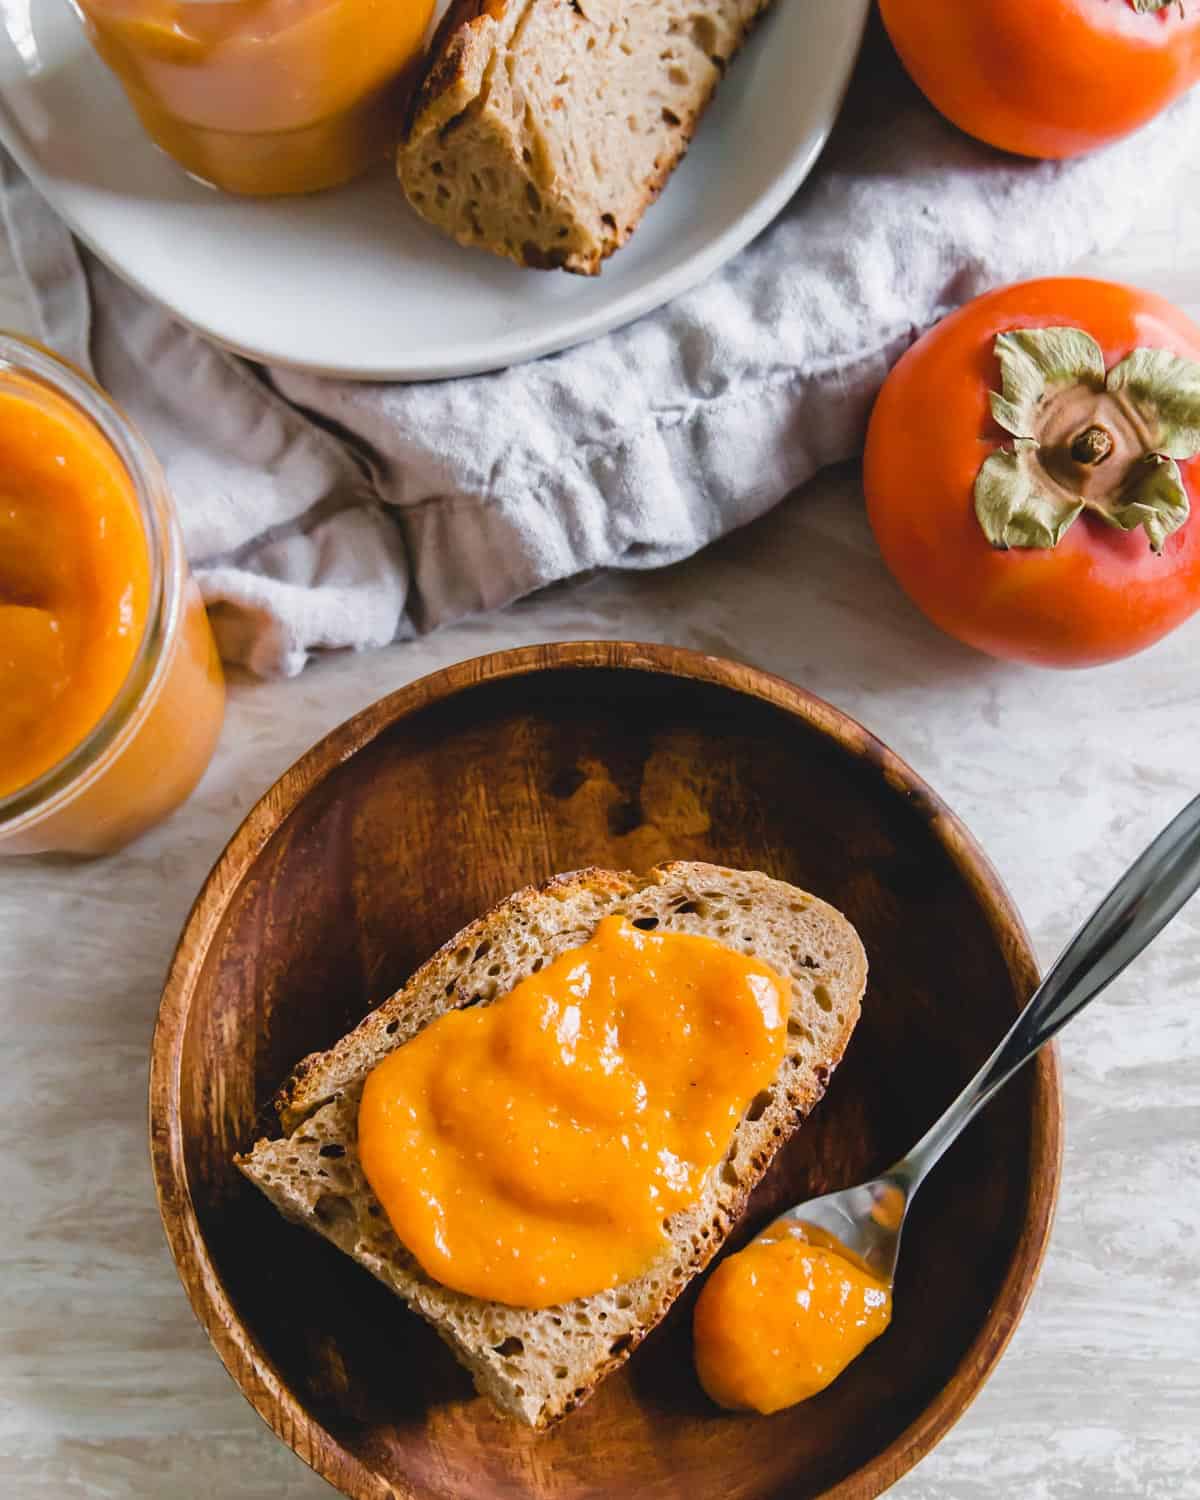 Simple persimmon jam recipe perfect for spreading on toast or gifting for the holidays.